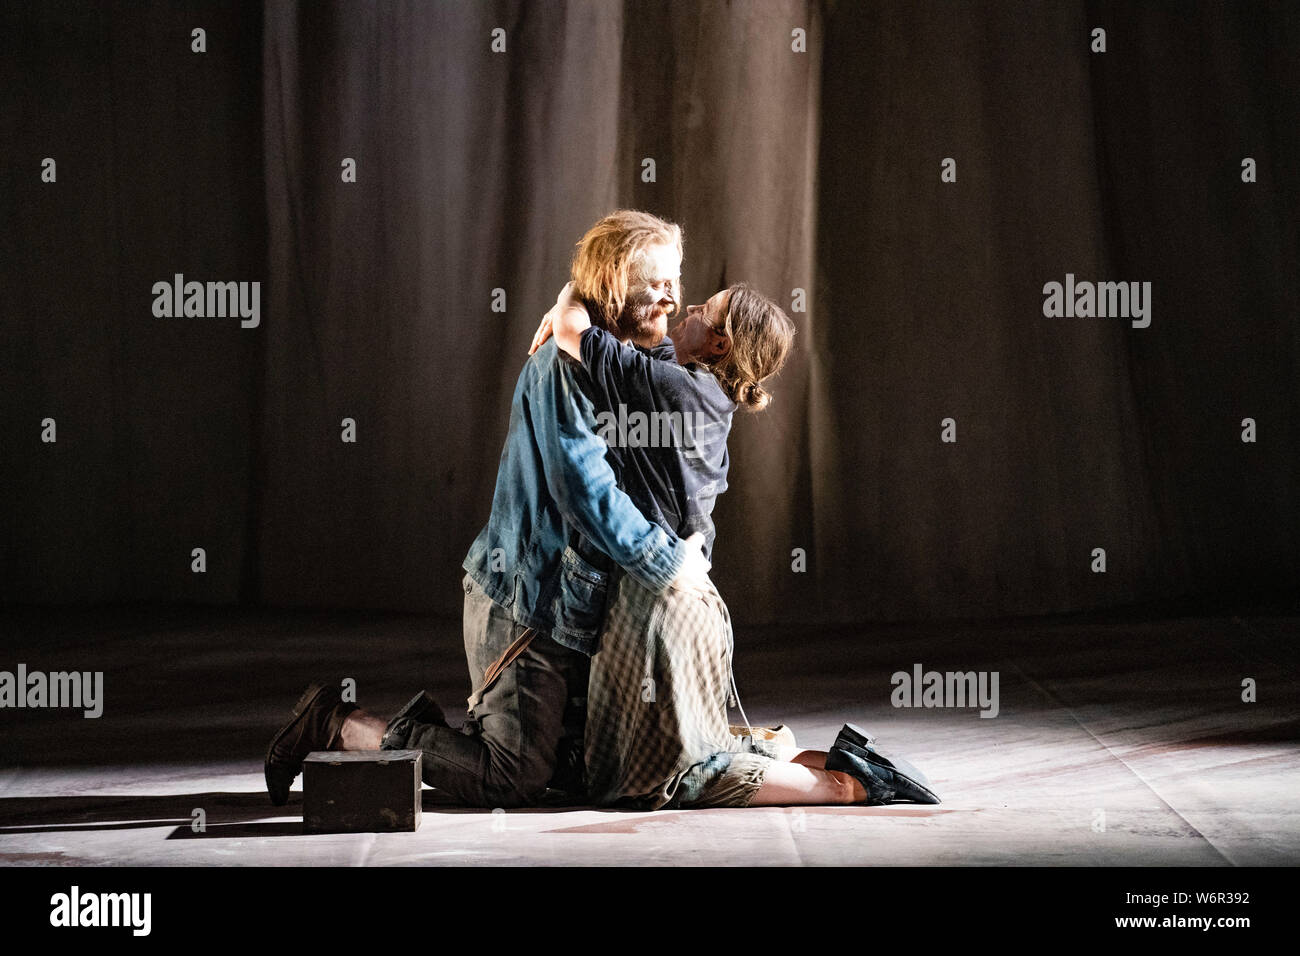 Edinburgh, Scotland, UK. 2nd Aug, 2019. Preview performance of extracts from the play The Secret River by Sydney Theatre Company at the King's Theatre . Adapted from the novel by Kate Grenville, this multi award winning stage drama charts the story of two families divided by culture and land. Credit: Iain Masterton/Alamy Live News Stock Photo